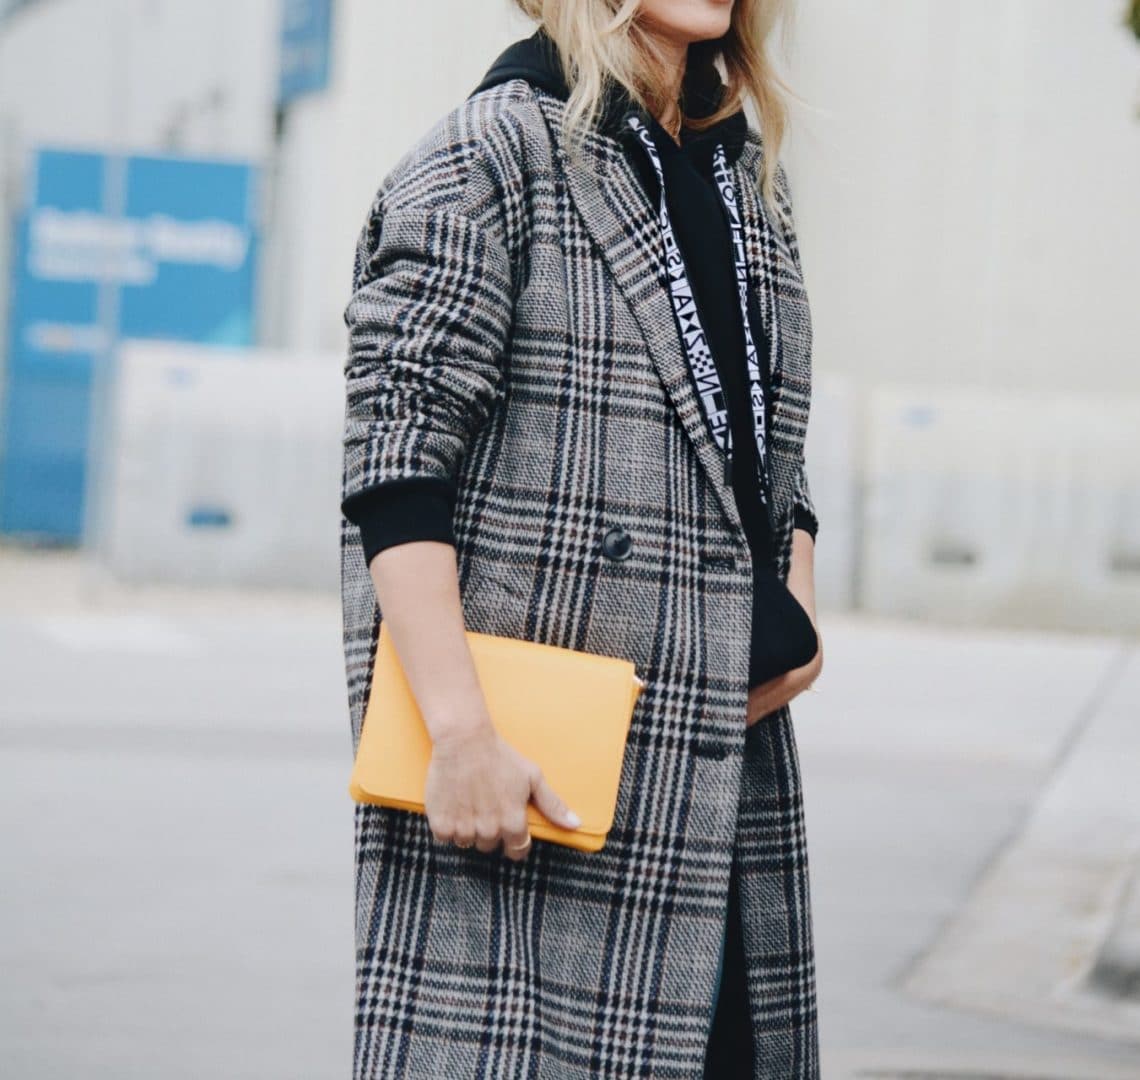 Proenza Hoodie styled with plaid jacket and yellow clutch - Her Fashioned Life